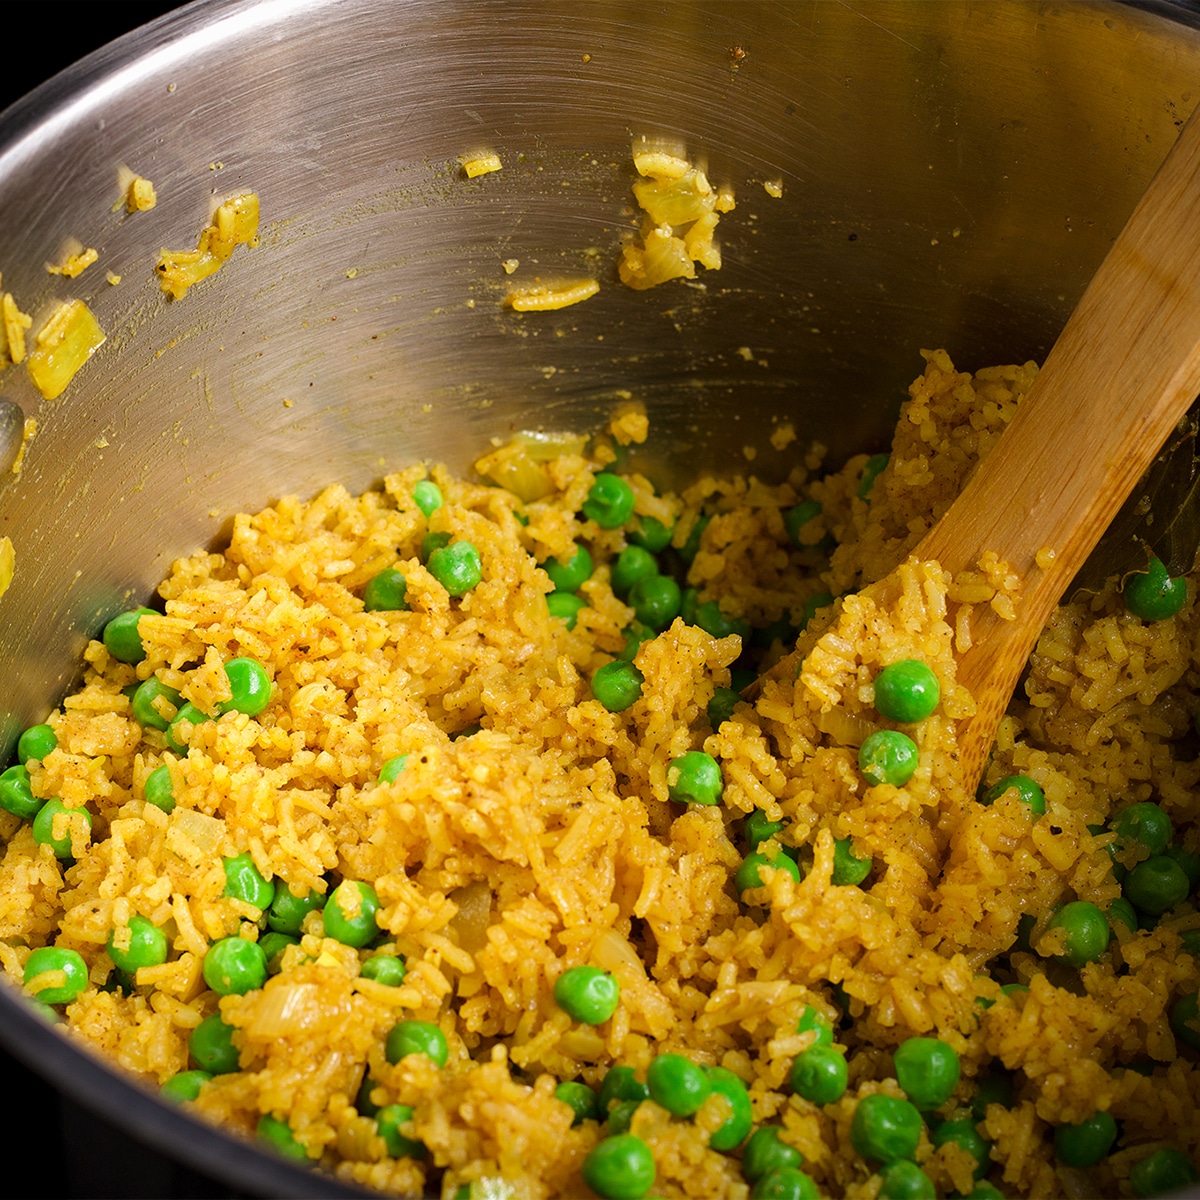 Using a wood spoon to stir peas into cooked Indian Rice.